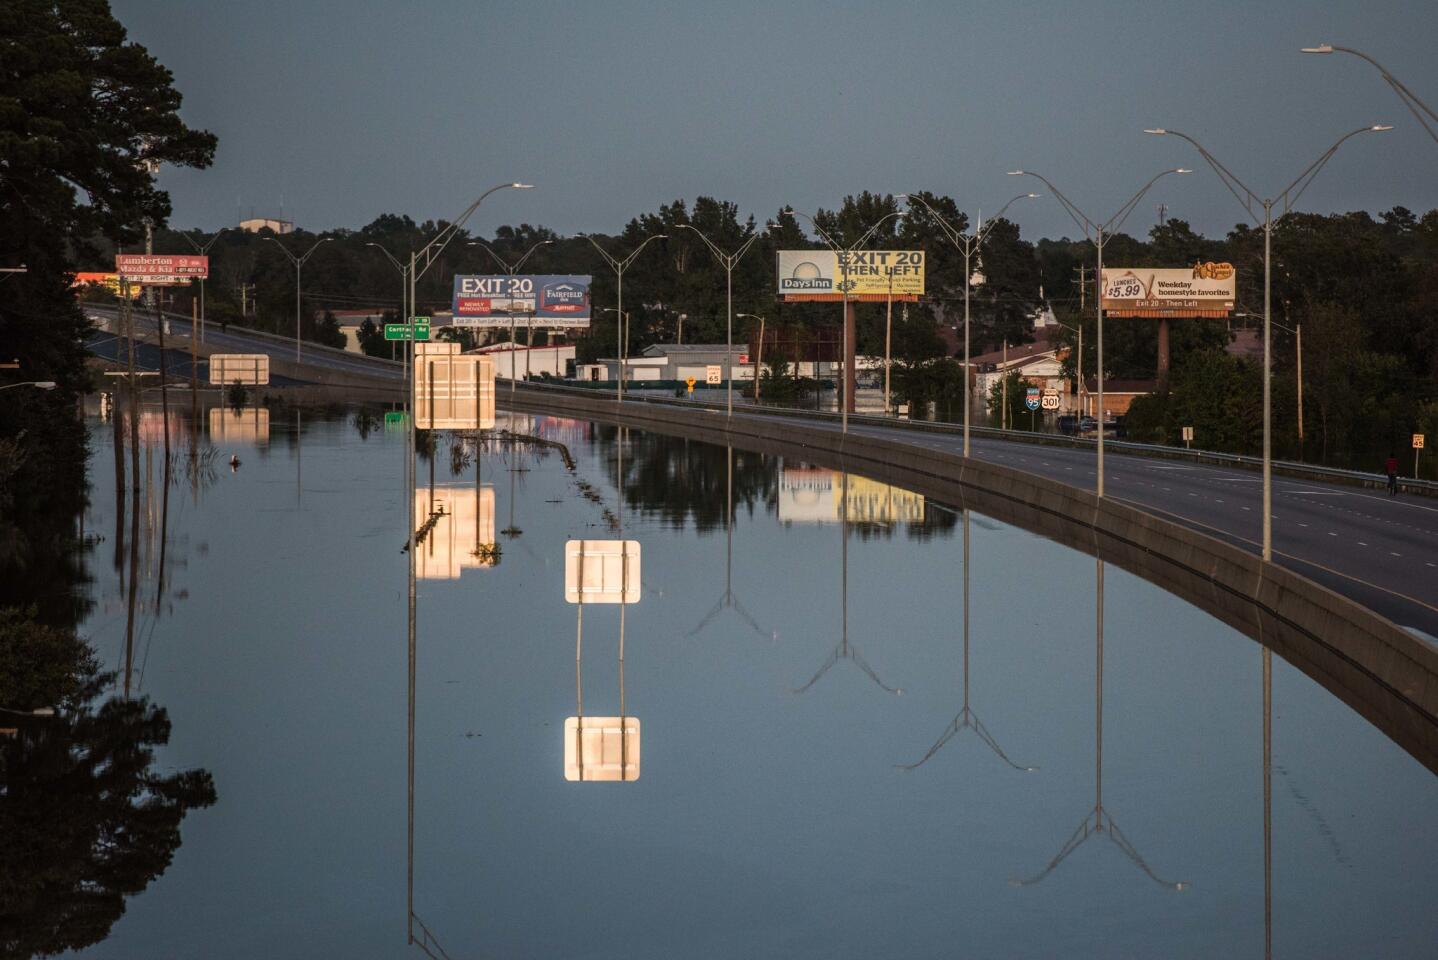 LUMBERTON, NC - OCTOBER 10: Floodwaters block travel on I-95 on October 10, 2016 in Lumberton, North Carolina. The death toll from Hurricane Matthew in the U.S. has climbed to over 20. (Photo by Sean Rayford/Getty Images) ** OUTS - ELSENT, FPG, CM - OUTS * NM, PH, VA if sourced by CT, LA or MoD **